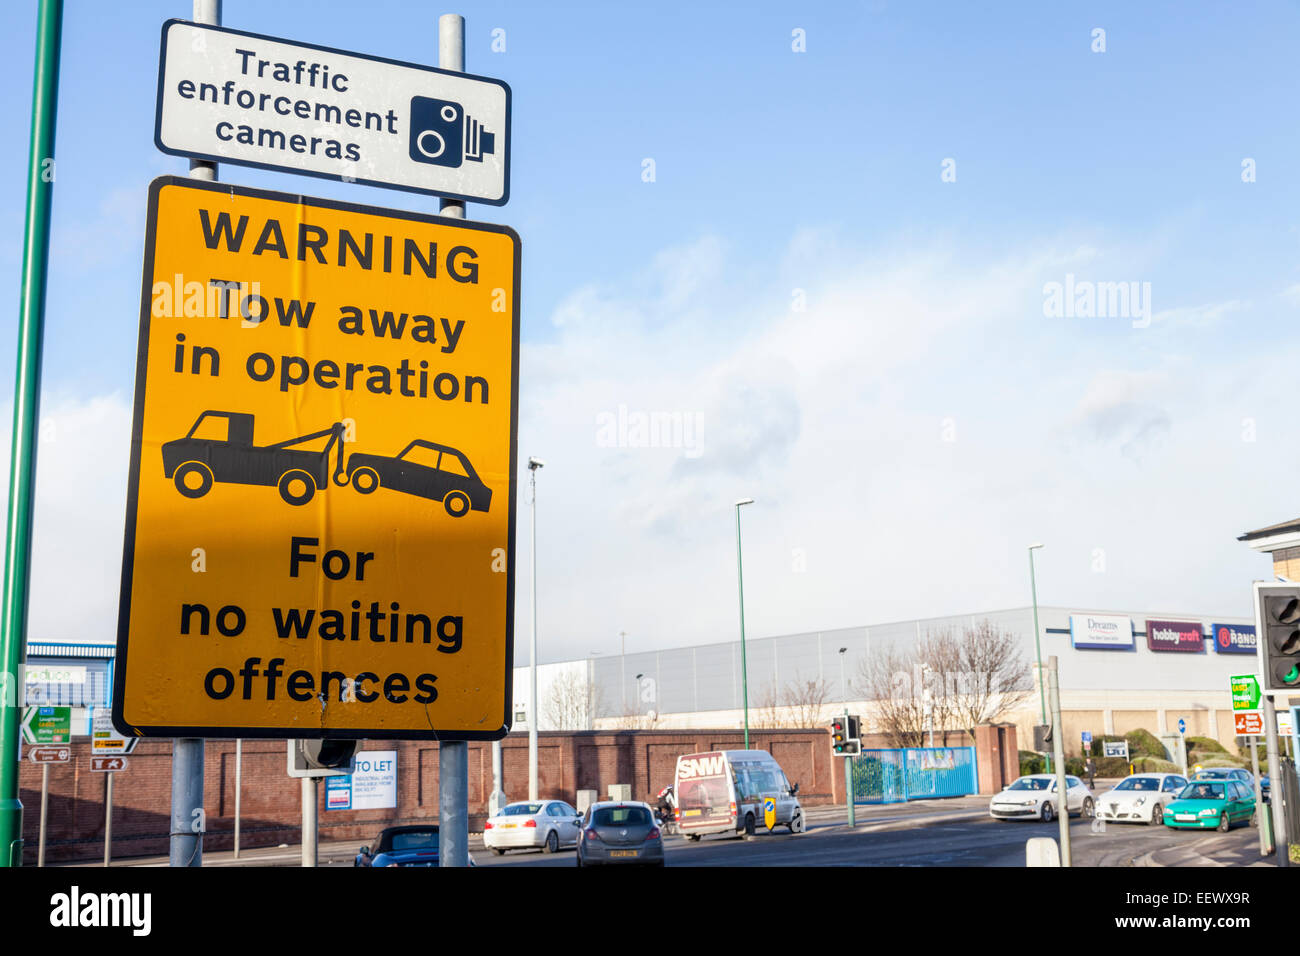 Road signs warning of 'Tow away in operation for no waiting offences' and 'Traffic enforcement cameras', Nottingham, England, UK Stock Photo